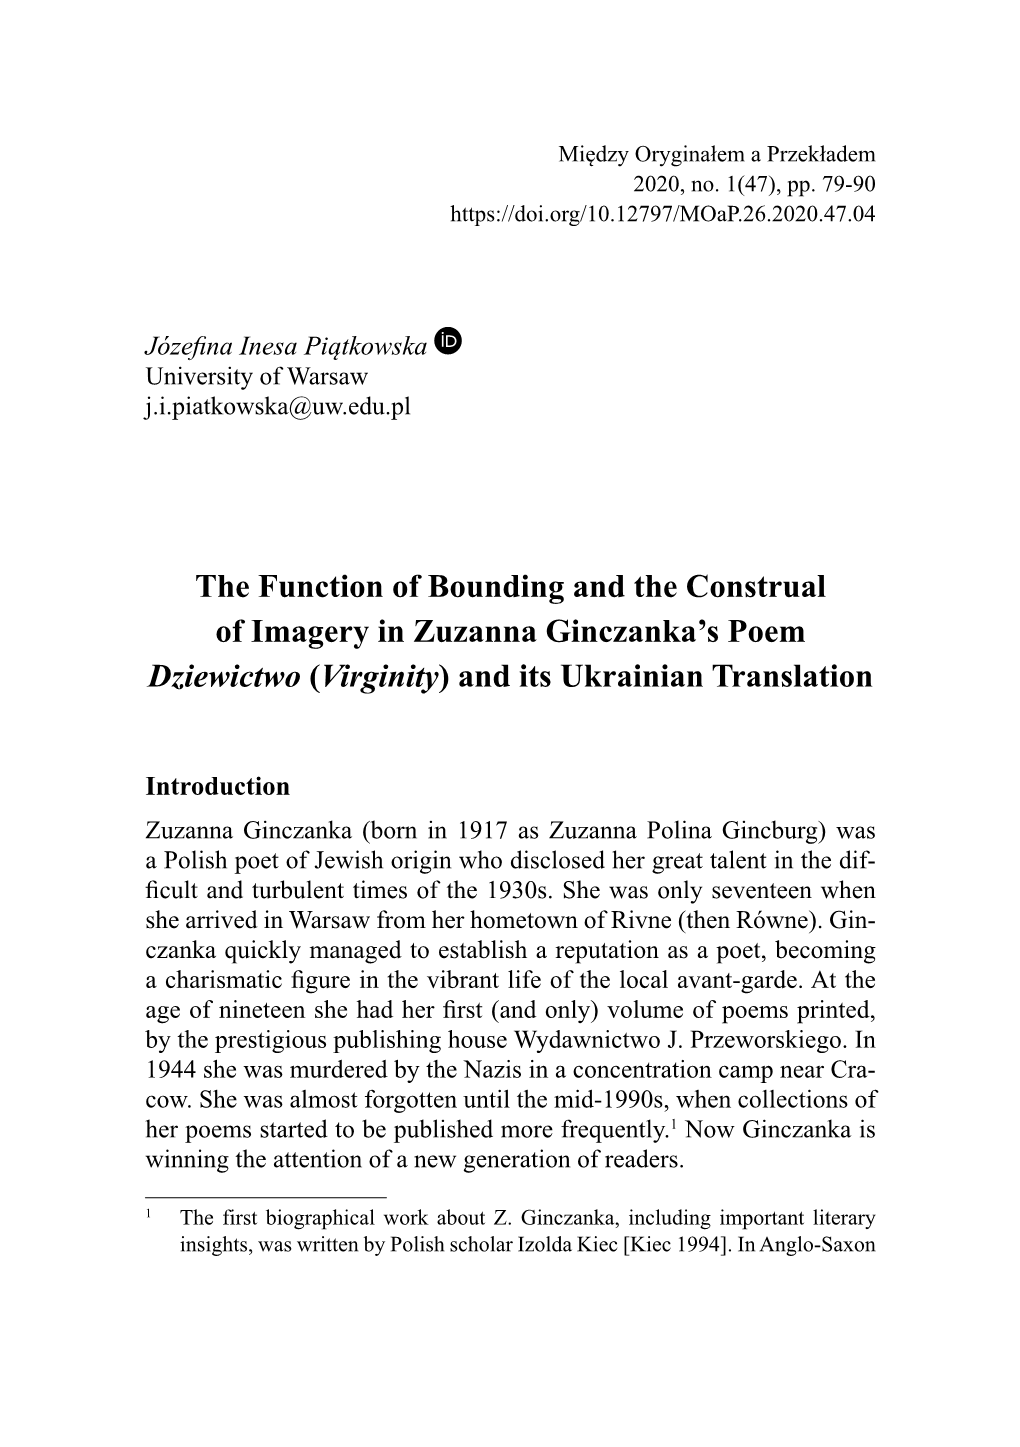 The Function of Bounding and the Construal of Imagery in Zuzanna Ginczanka’S Poem Dziewictwo (Virginity) and Its Ukrainian Translation